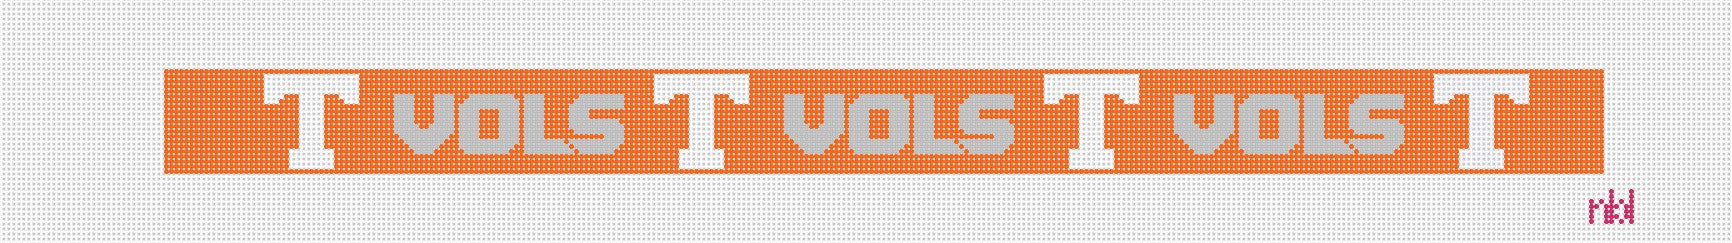 Tennessee Vols and Power T Belt Canvas-2